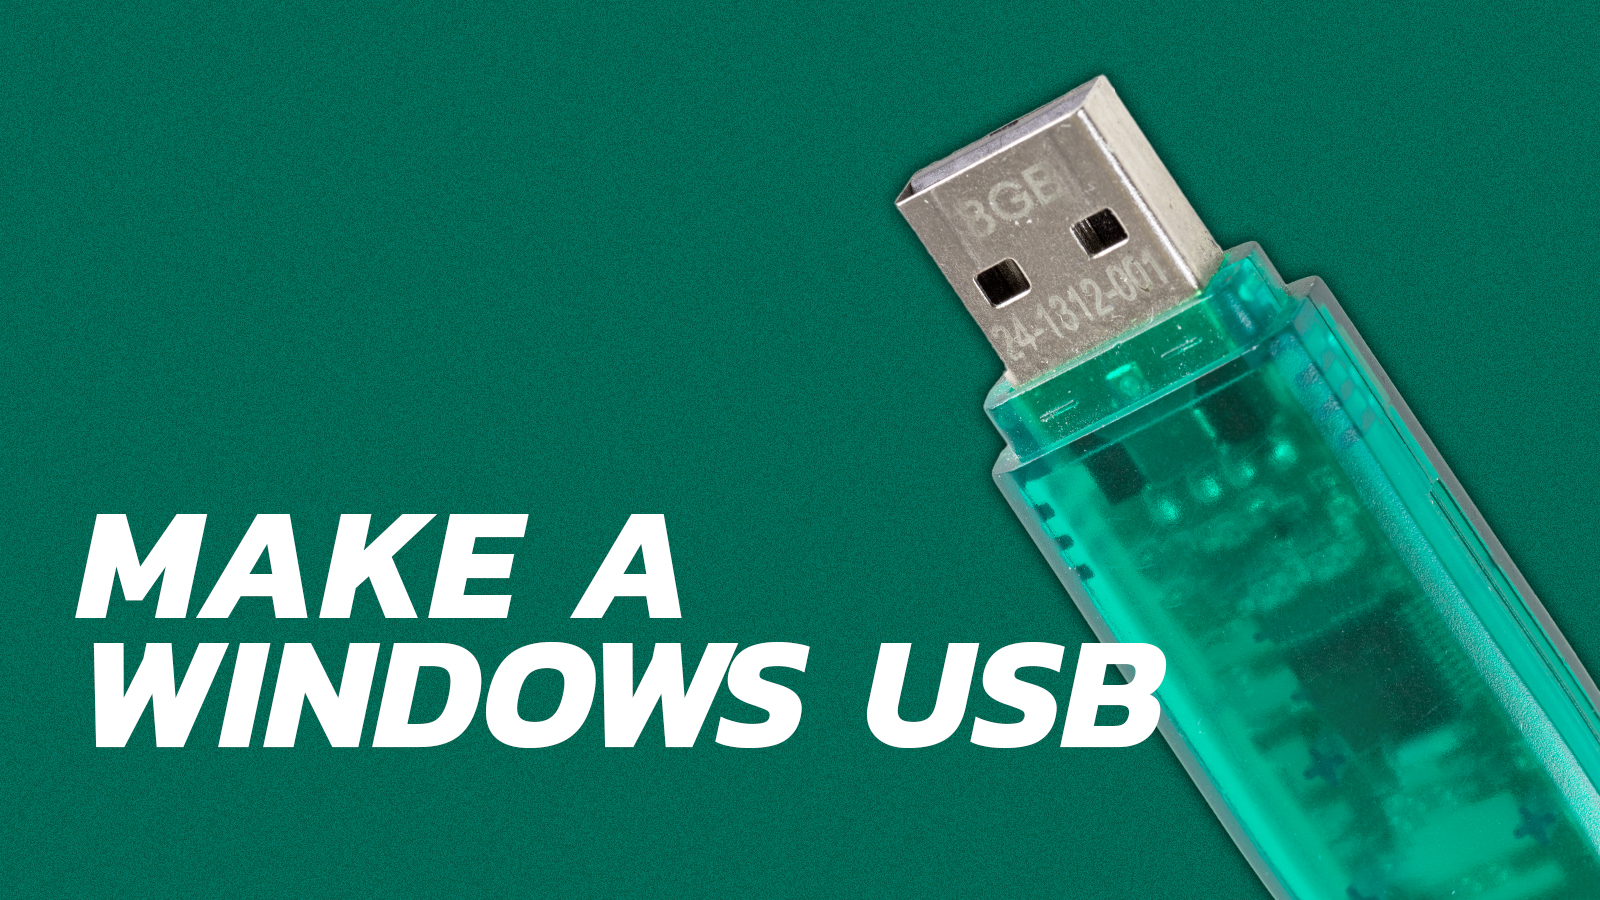 Windows 10 USB flash drives now available to pre-order on